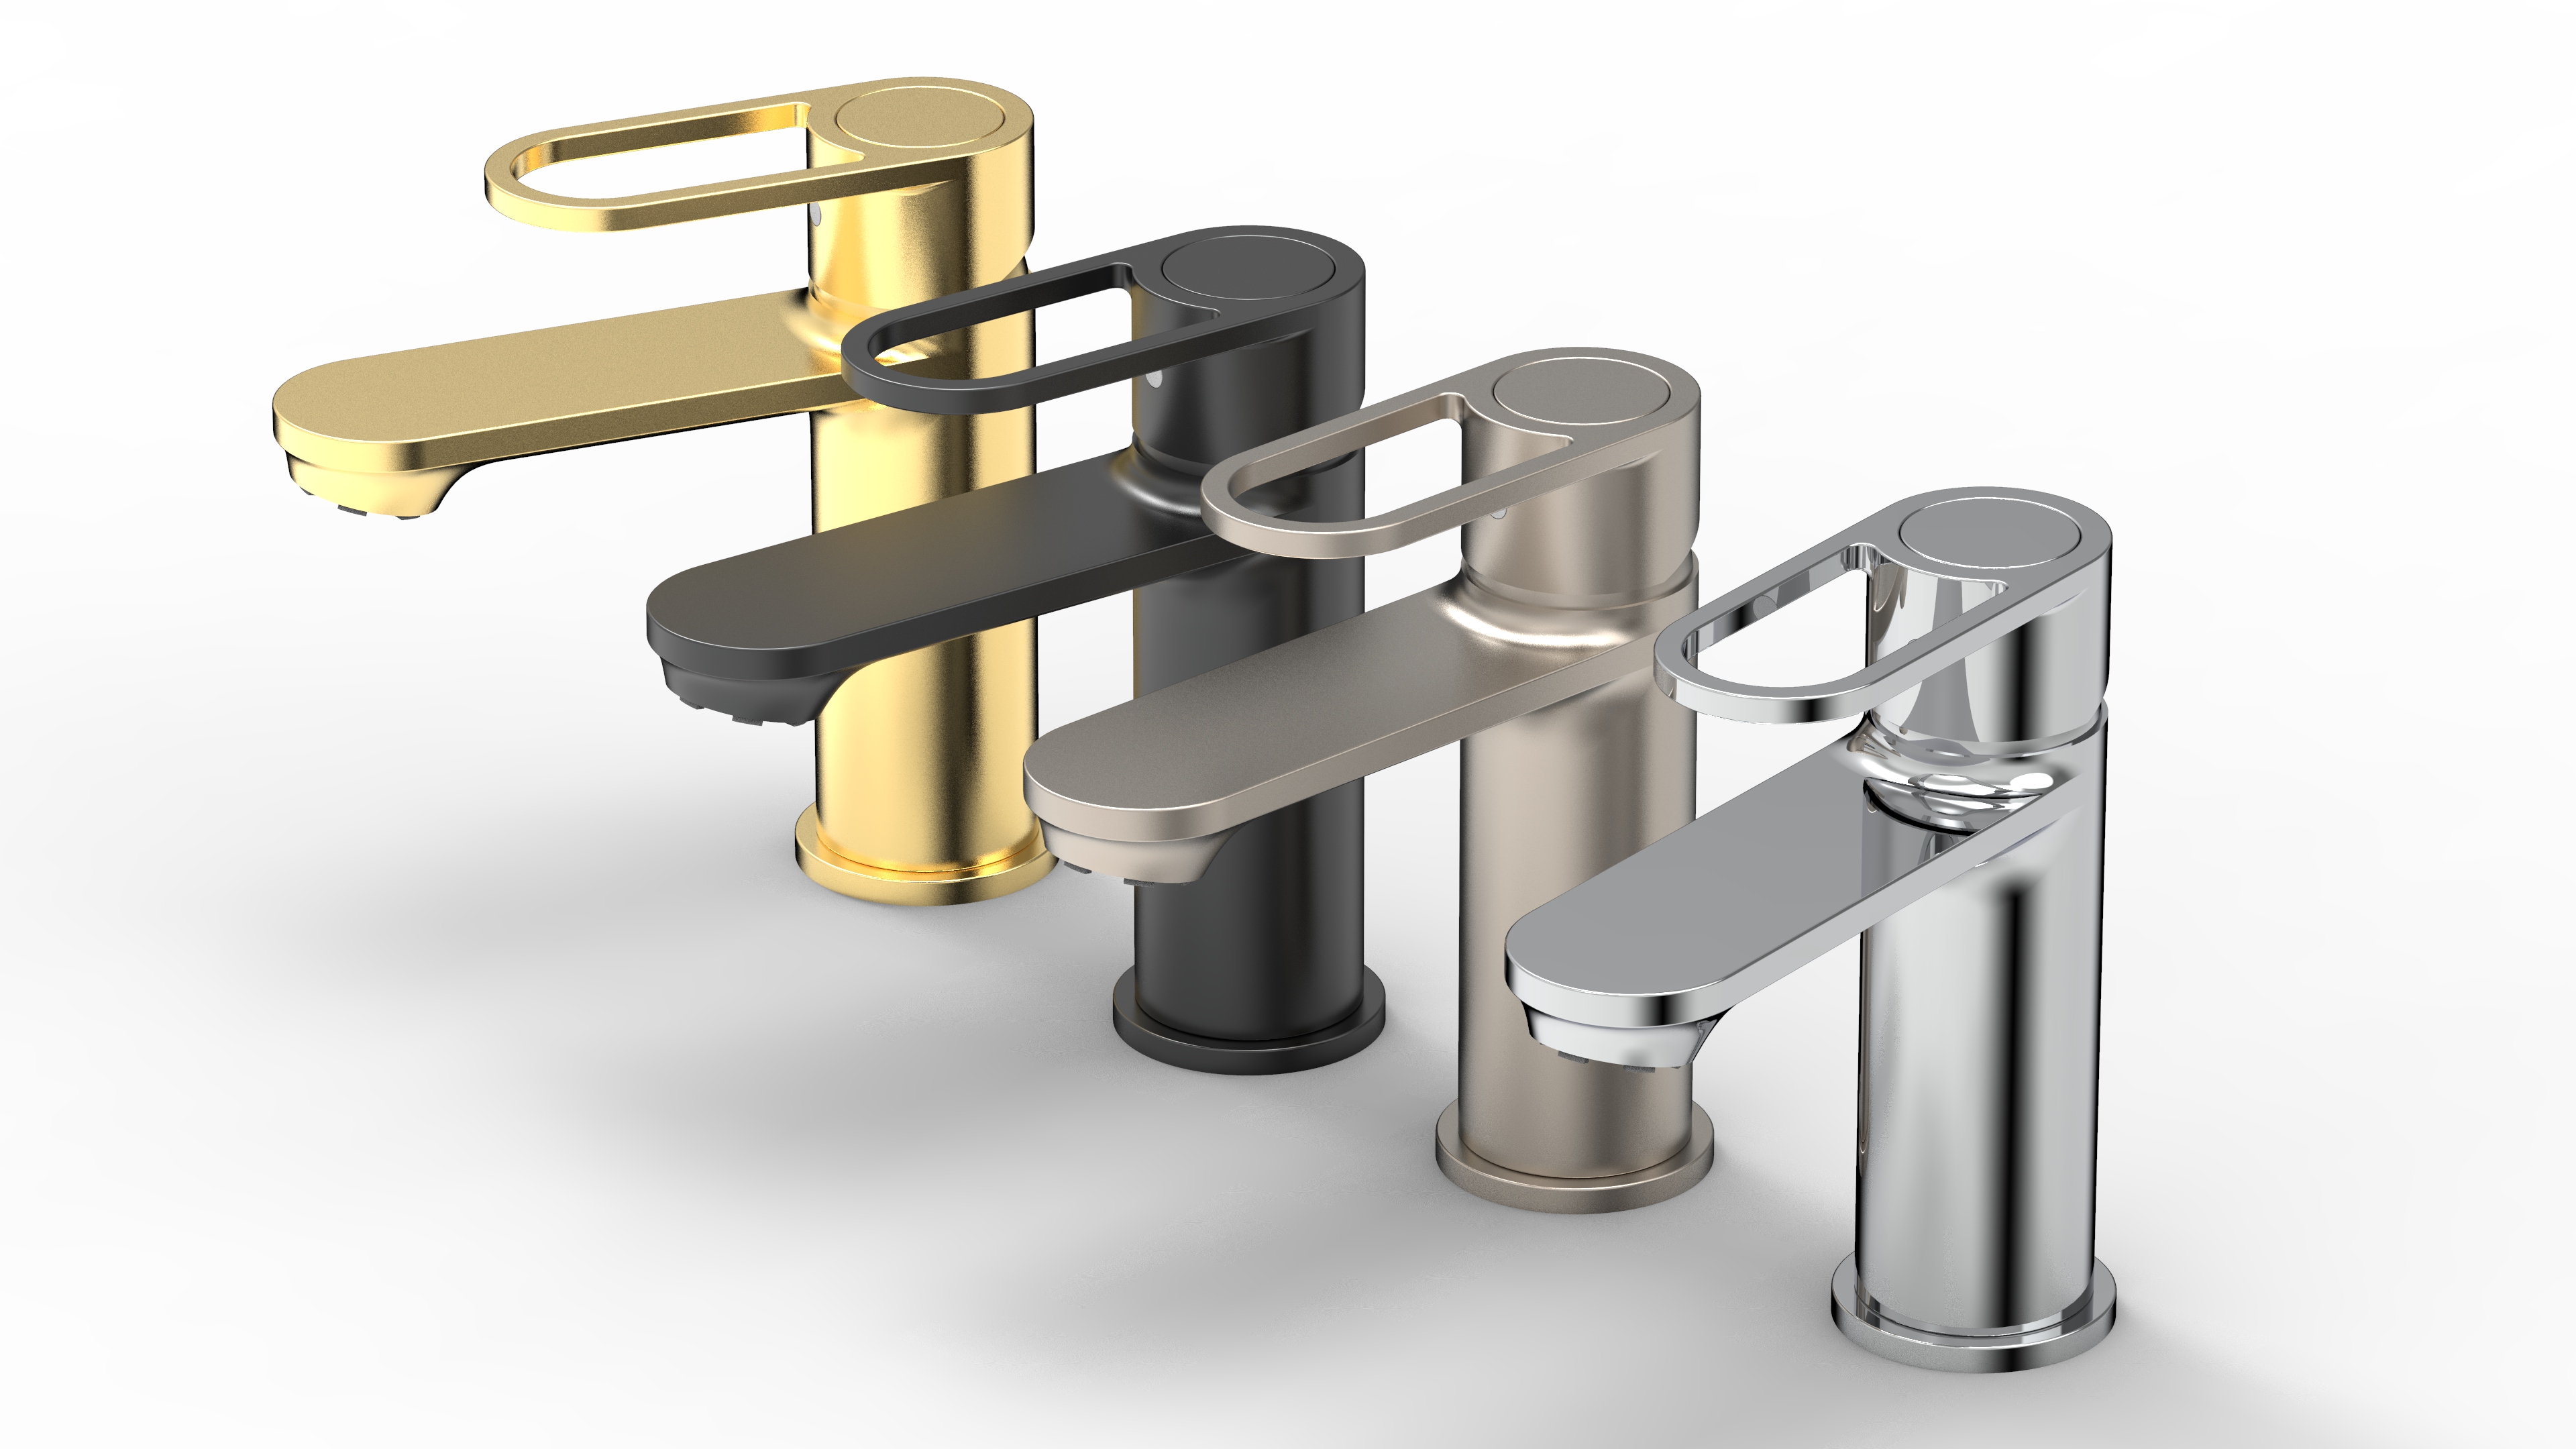 What are the benefits of choosing brass basin faucets for your bathroom?